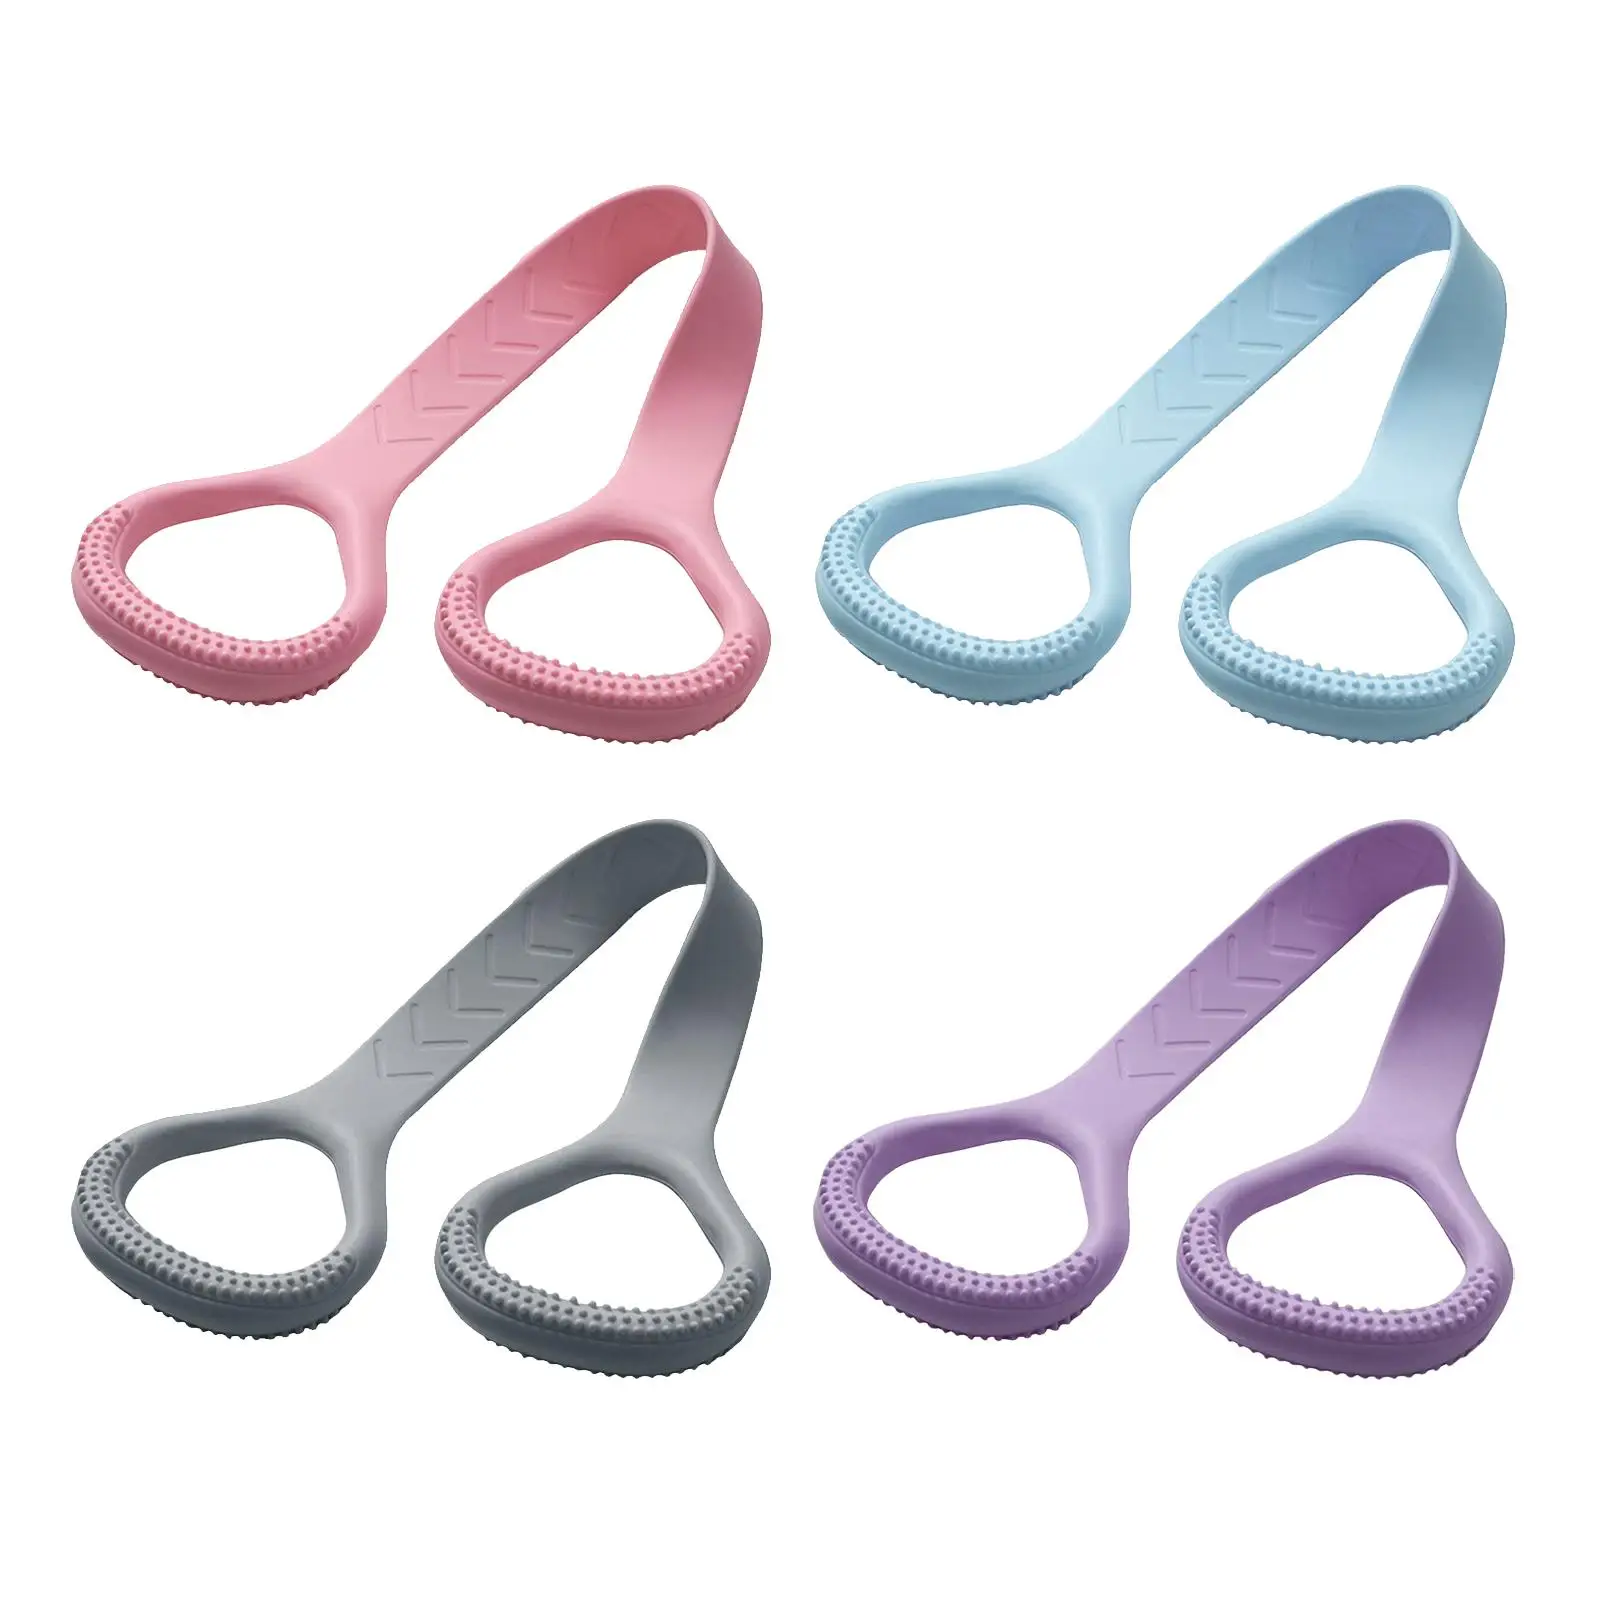 8 Shape Resistance Band Foot Leg Hand Stretcher Stretch Fitness Band for Resistance Training Pilates Fitness Equipment Yoga